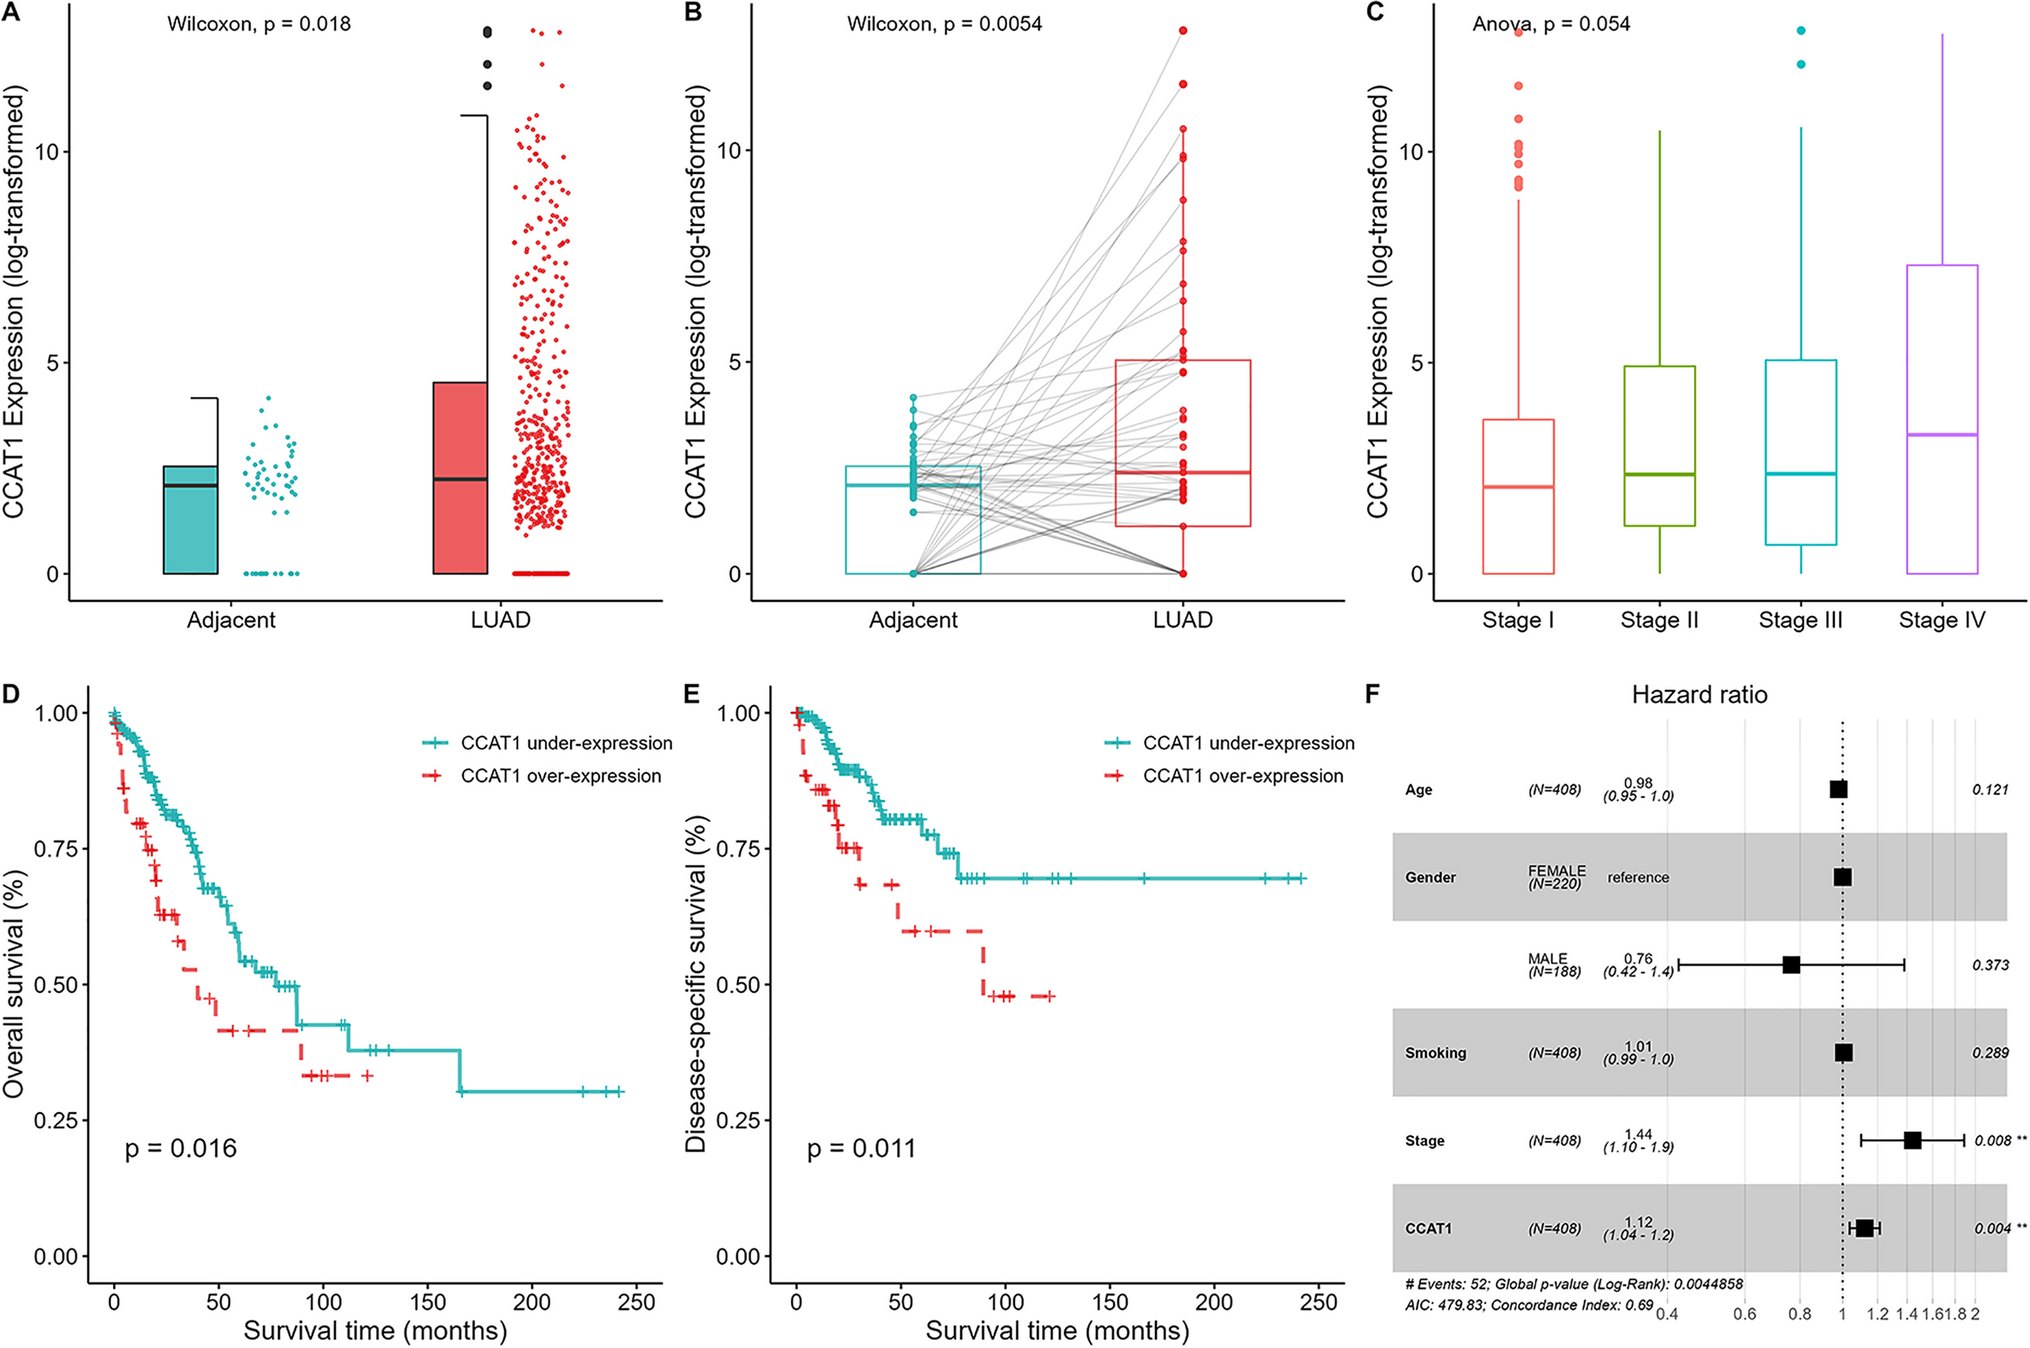 Long non-coding RNA CCAT1 acts as an oncogene to promote radiation resistance in lung adenocarcinoma: an epigenomics-based investigation